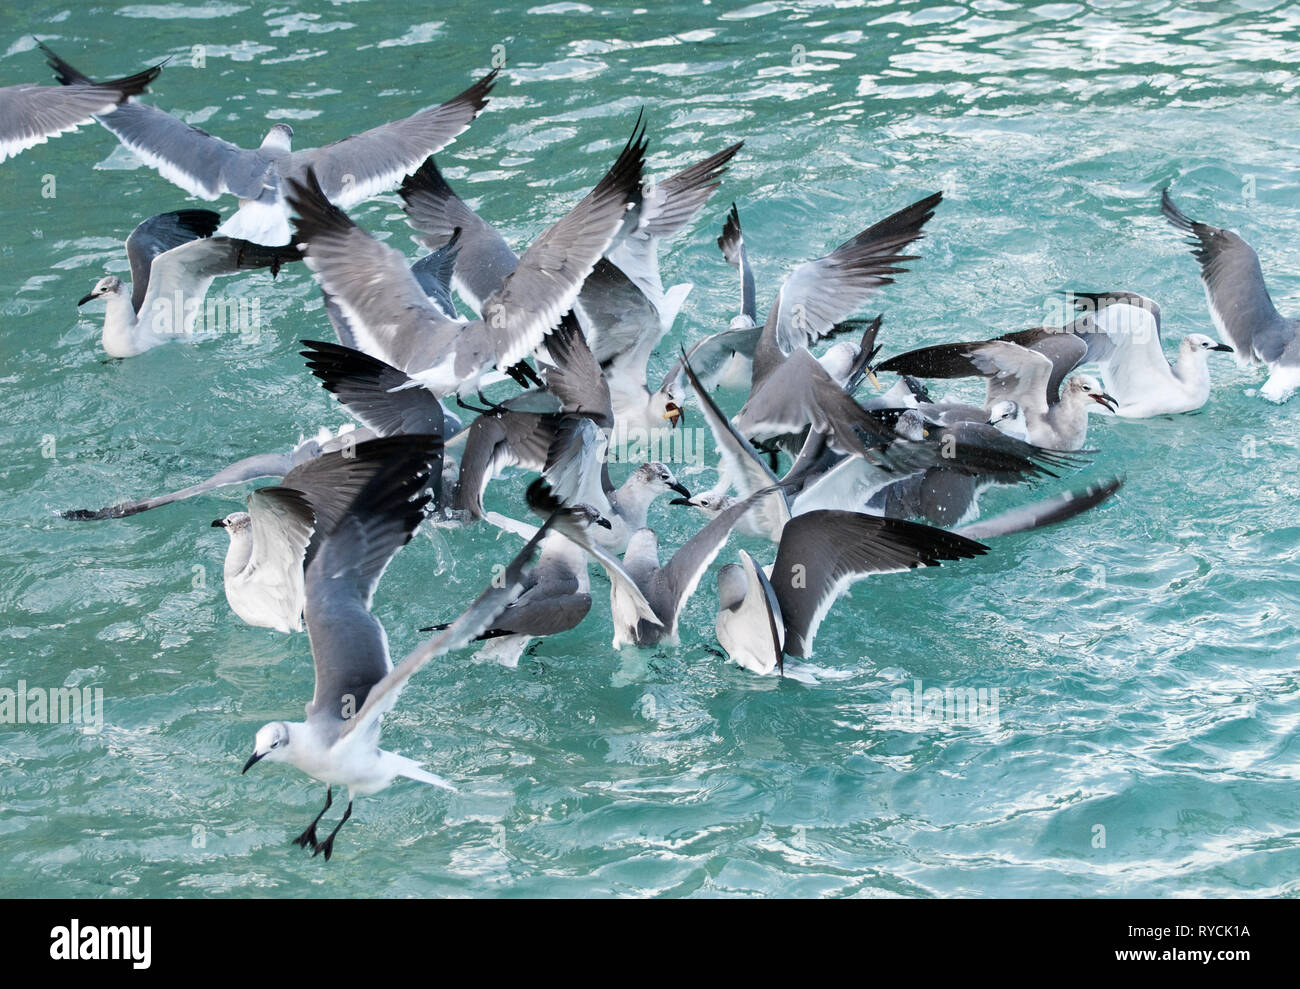 The group of seagulls fighting for food that was dropped by tourists (Nassau, Bahamas). Stock Photo